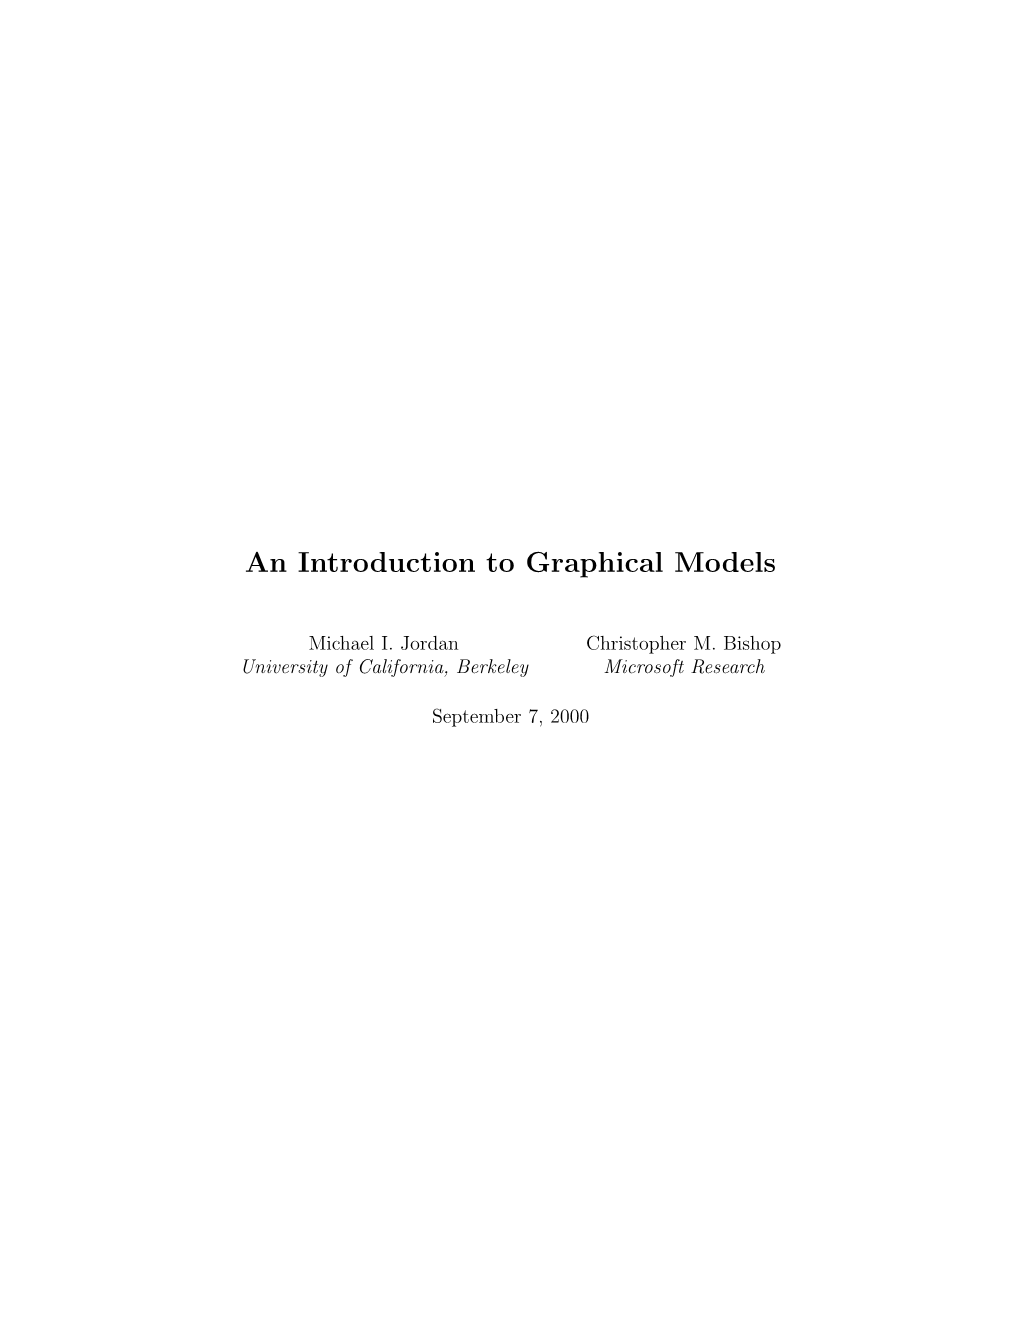 An Introduction to Graphical Models